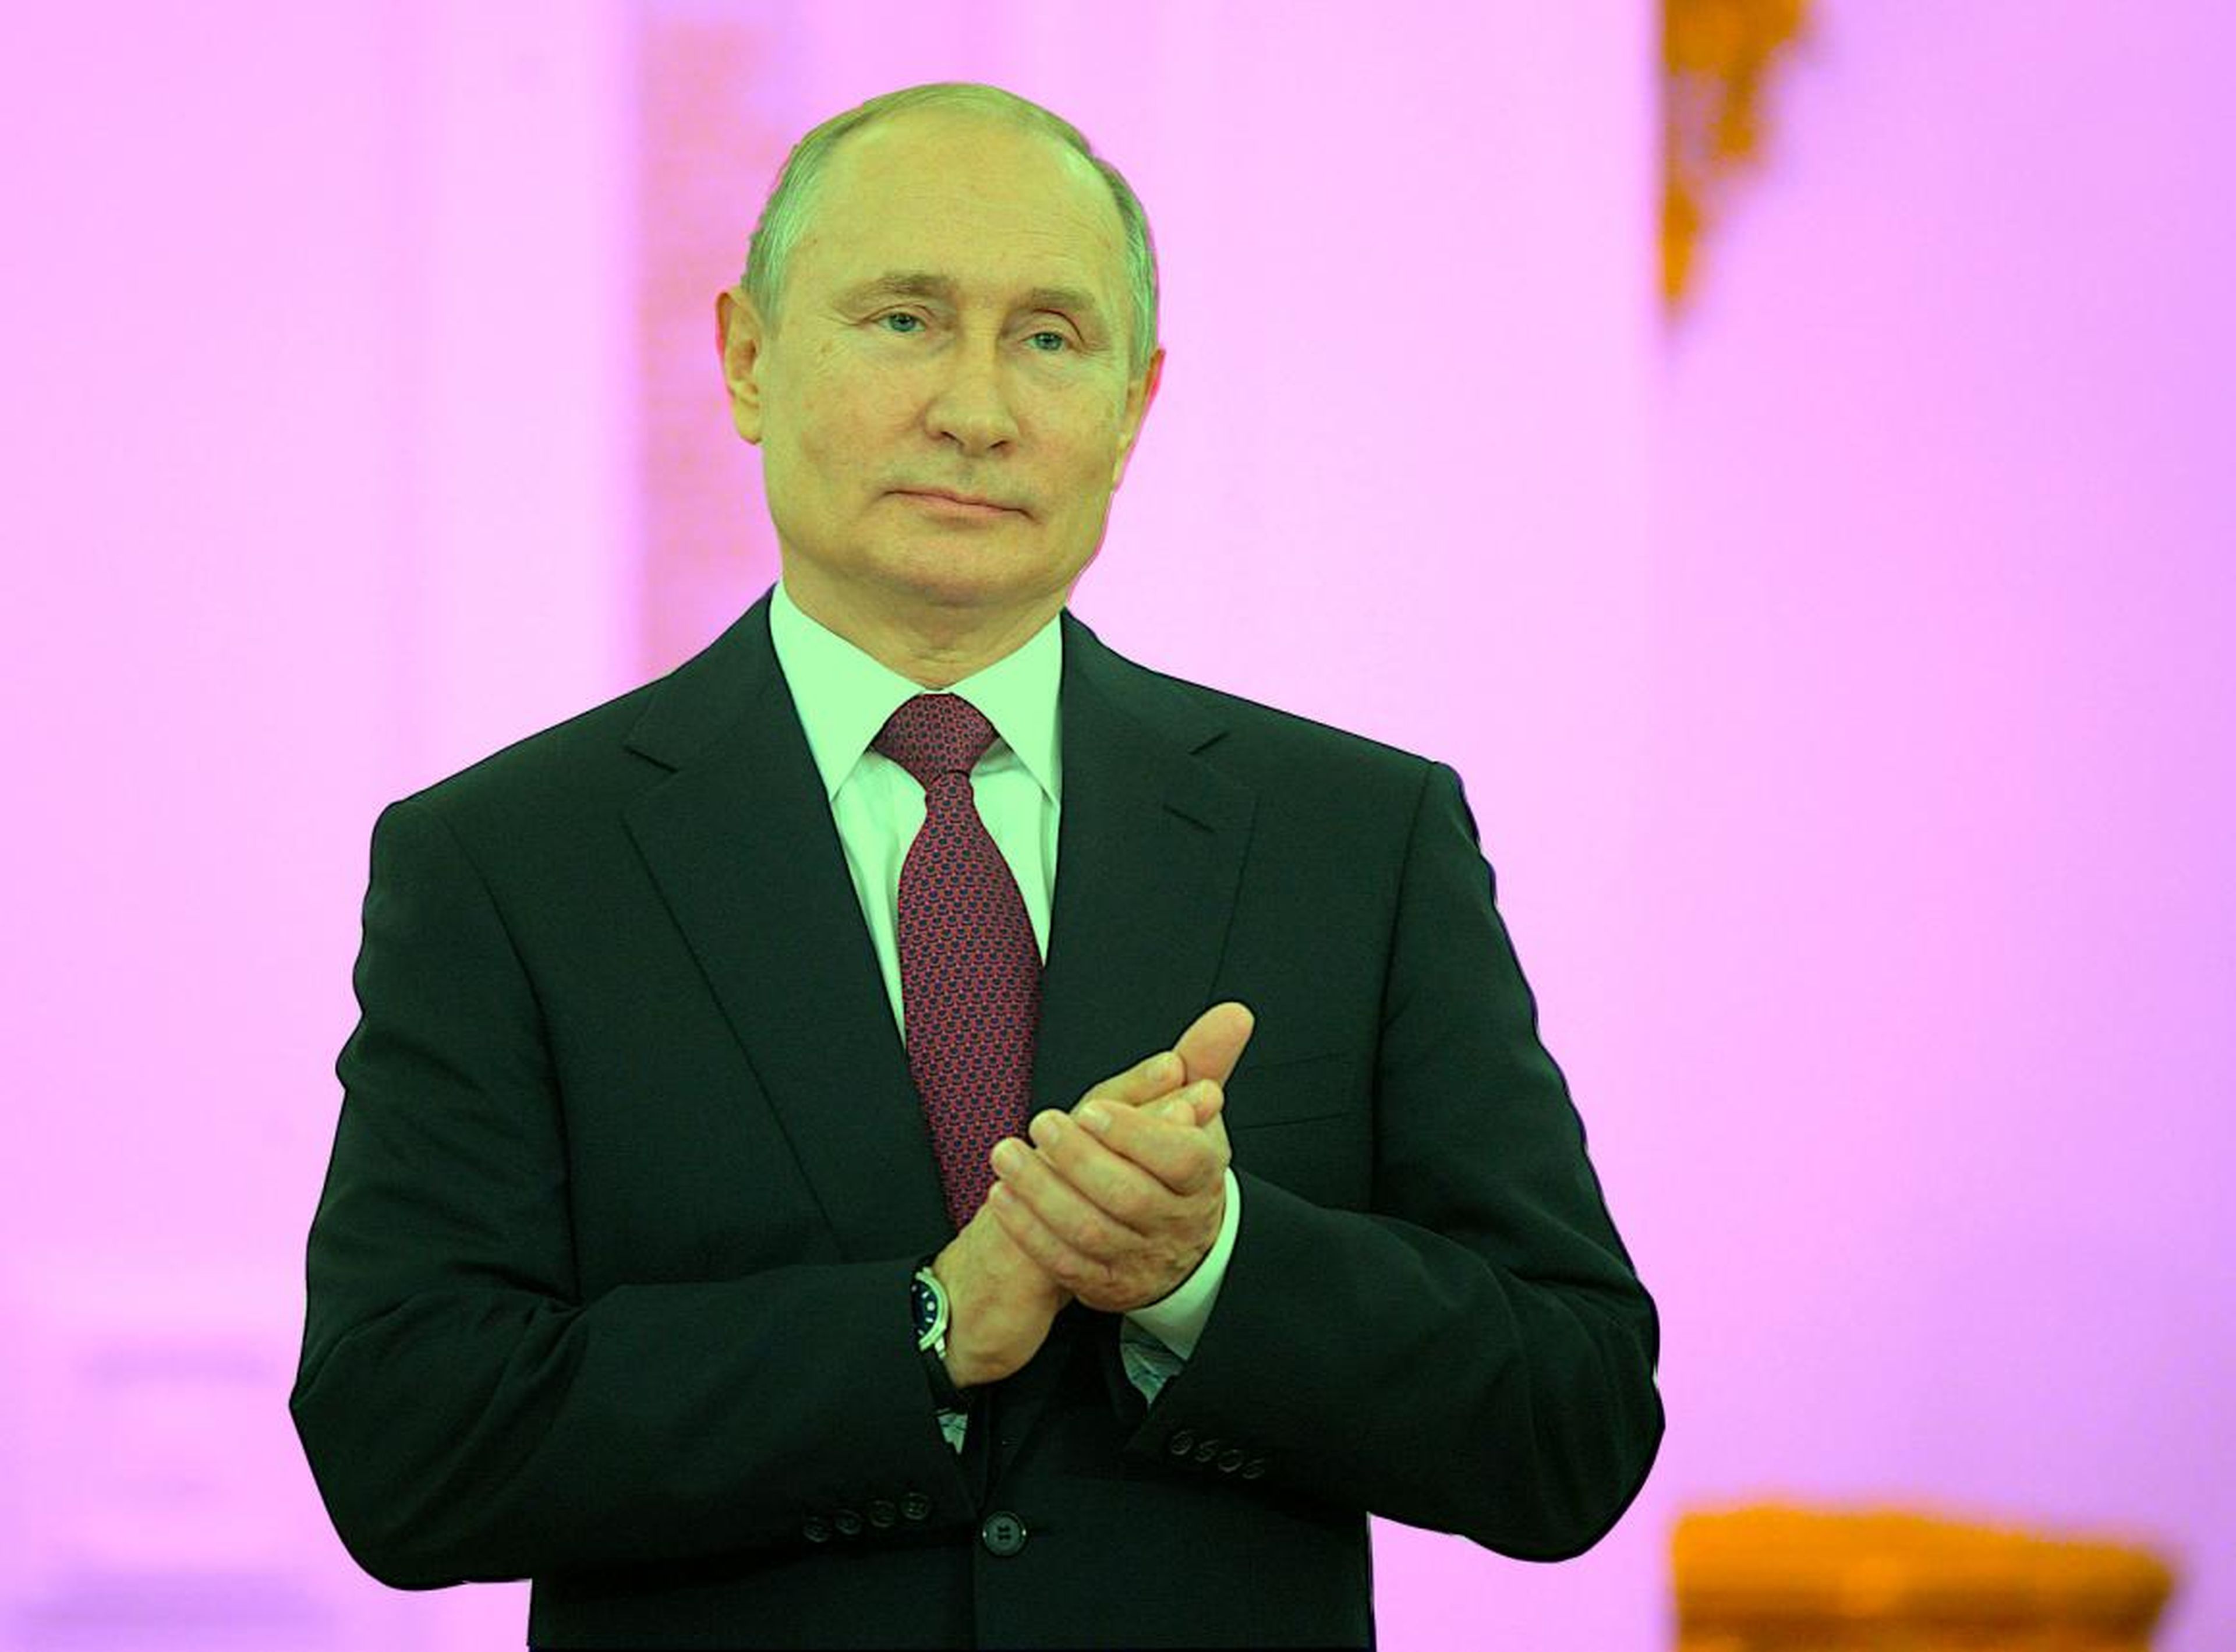 Russia is building a parallel internet that Moscow will control.